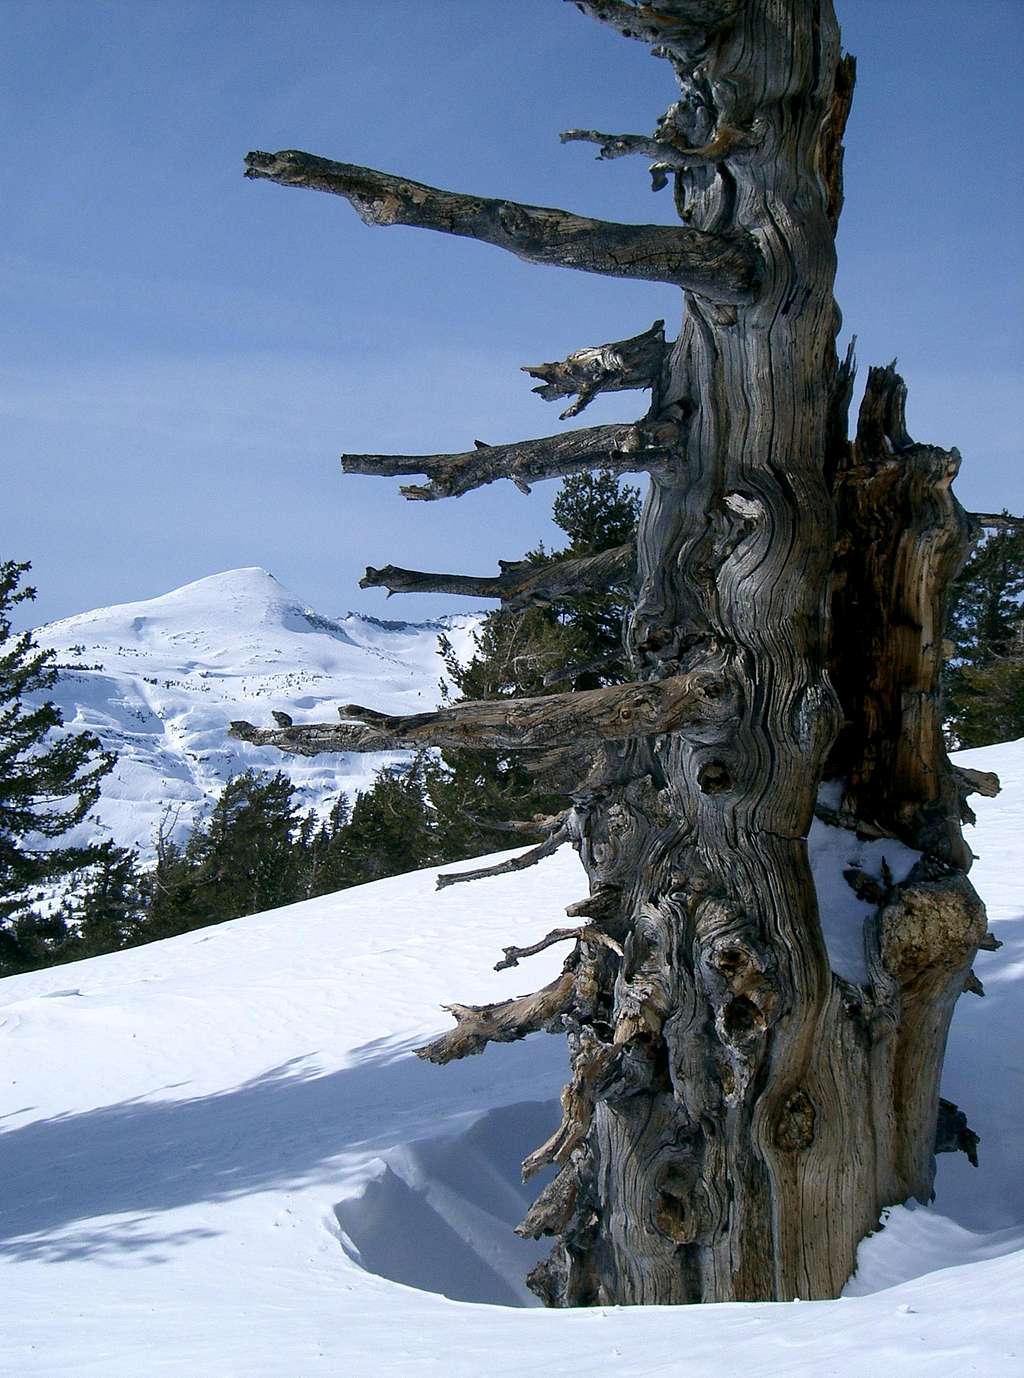 A Tree Pointing to Pyramid Peak in the Distance